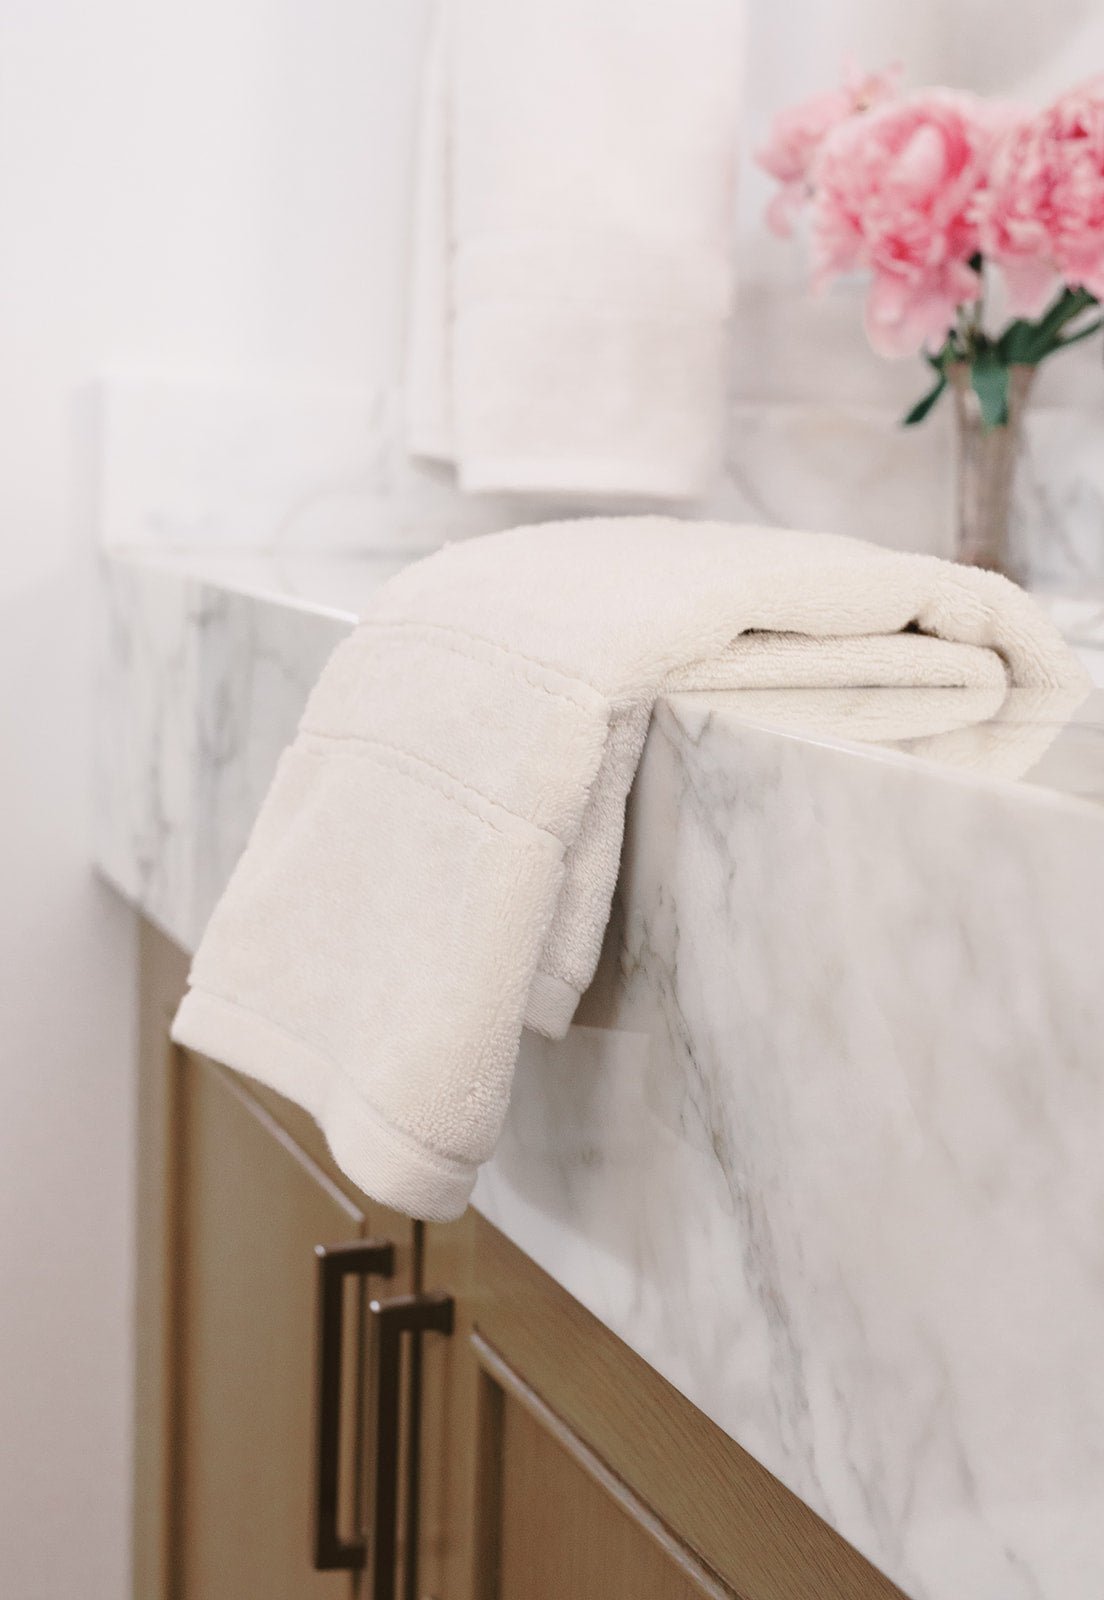 Premium Plush Hand Towel in the color Seashell. Photo of Seashell Premium Plush Hand Towel taken in a bathroom. One Premium Plush Hand Towel is hanging from a towel ring while the other is resting on the sink in the bathroom. 